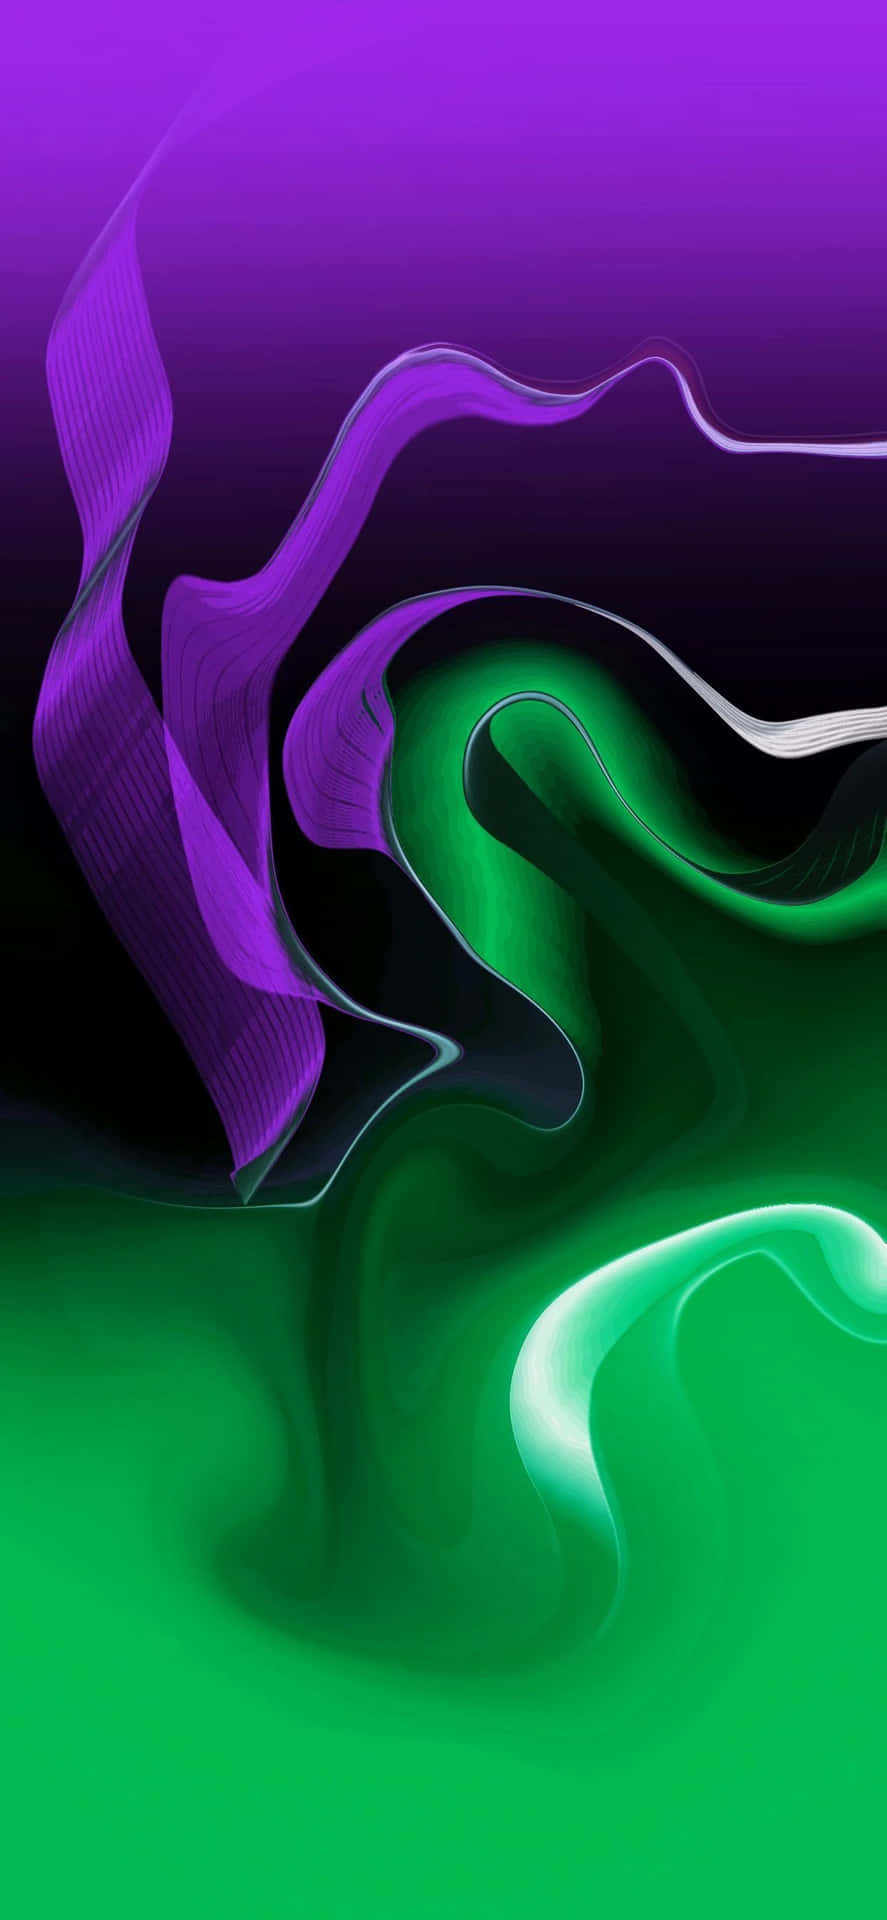 Brightly colored purple and green background.